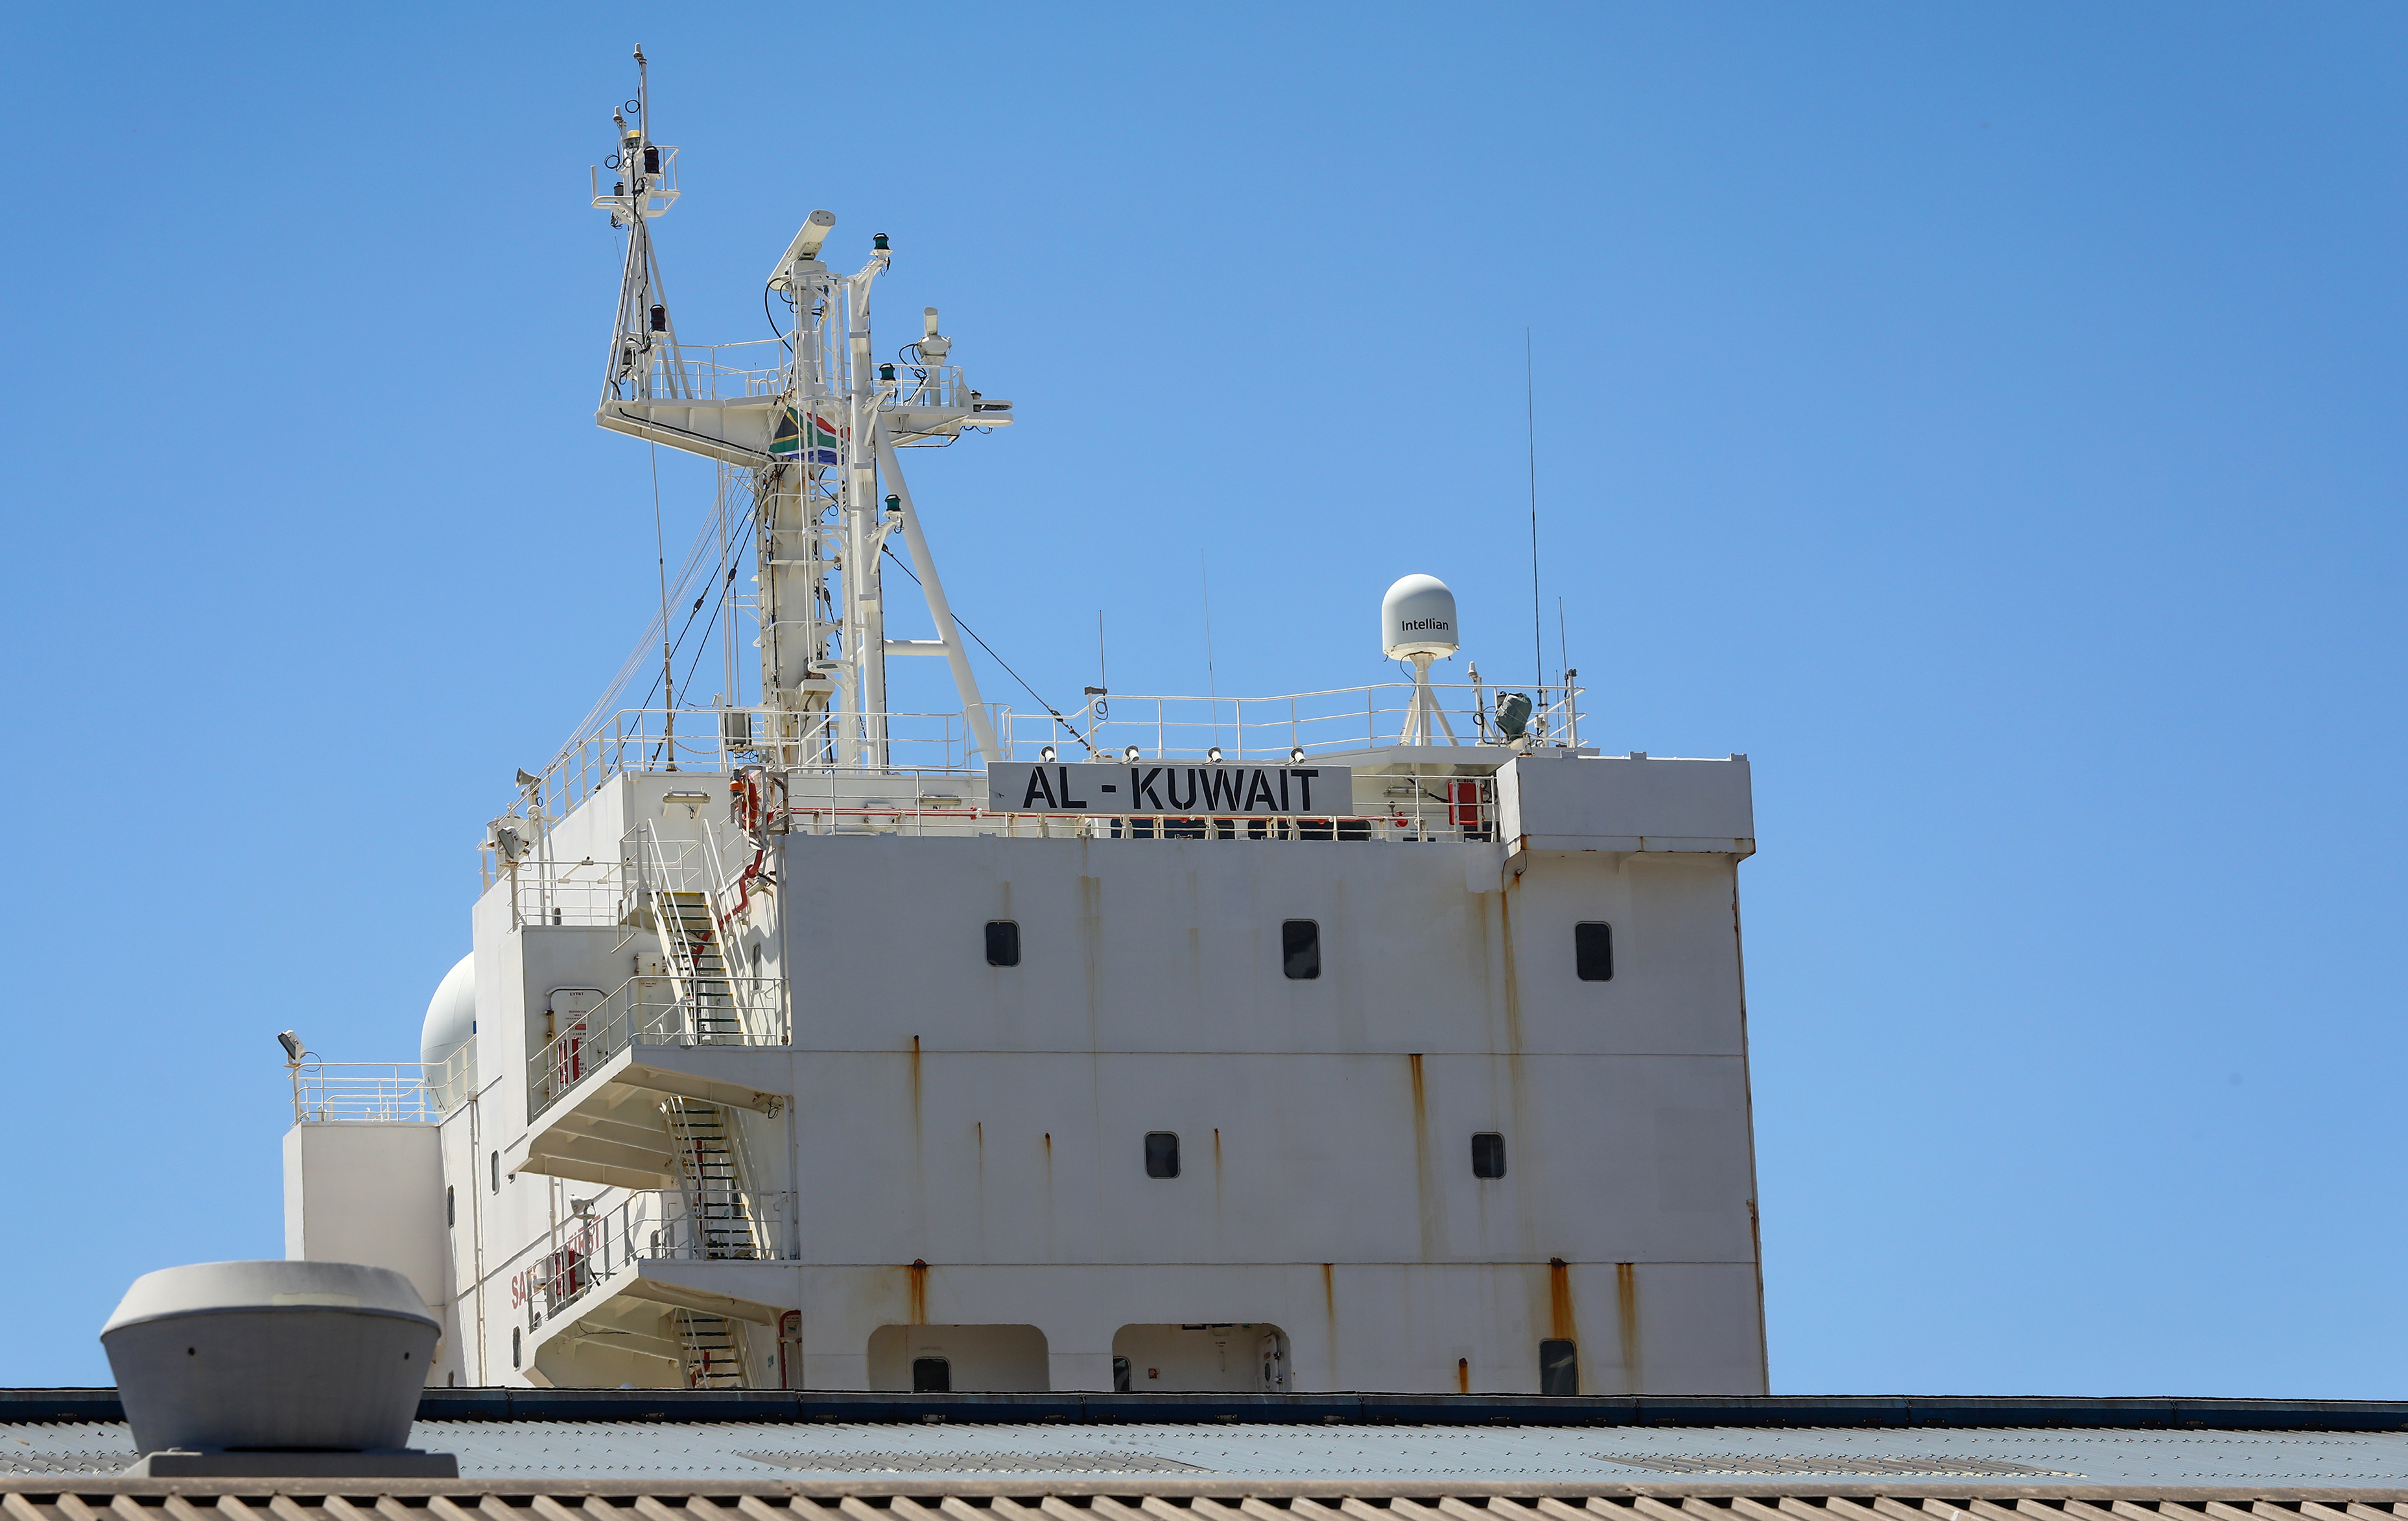 livestock carrier docked in cape town causes big stink and animal welfare beef